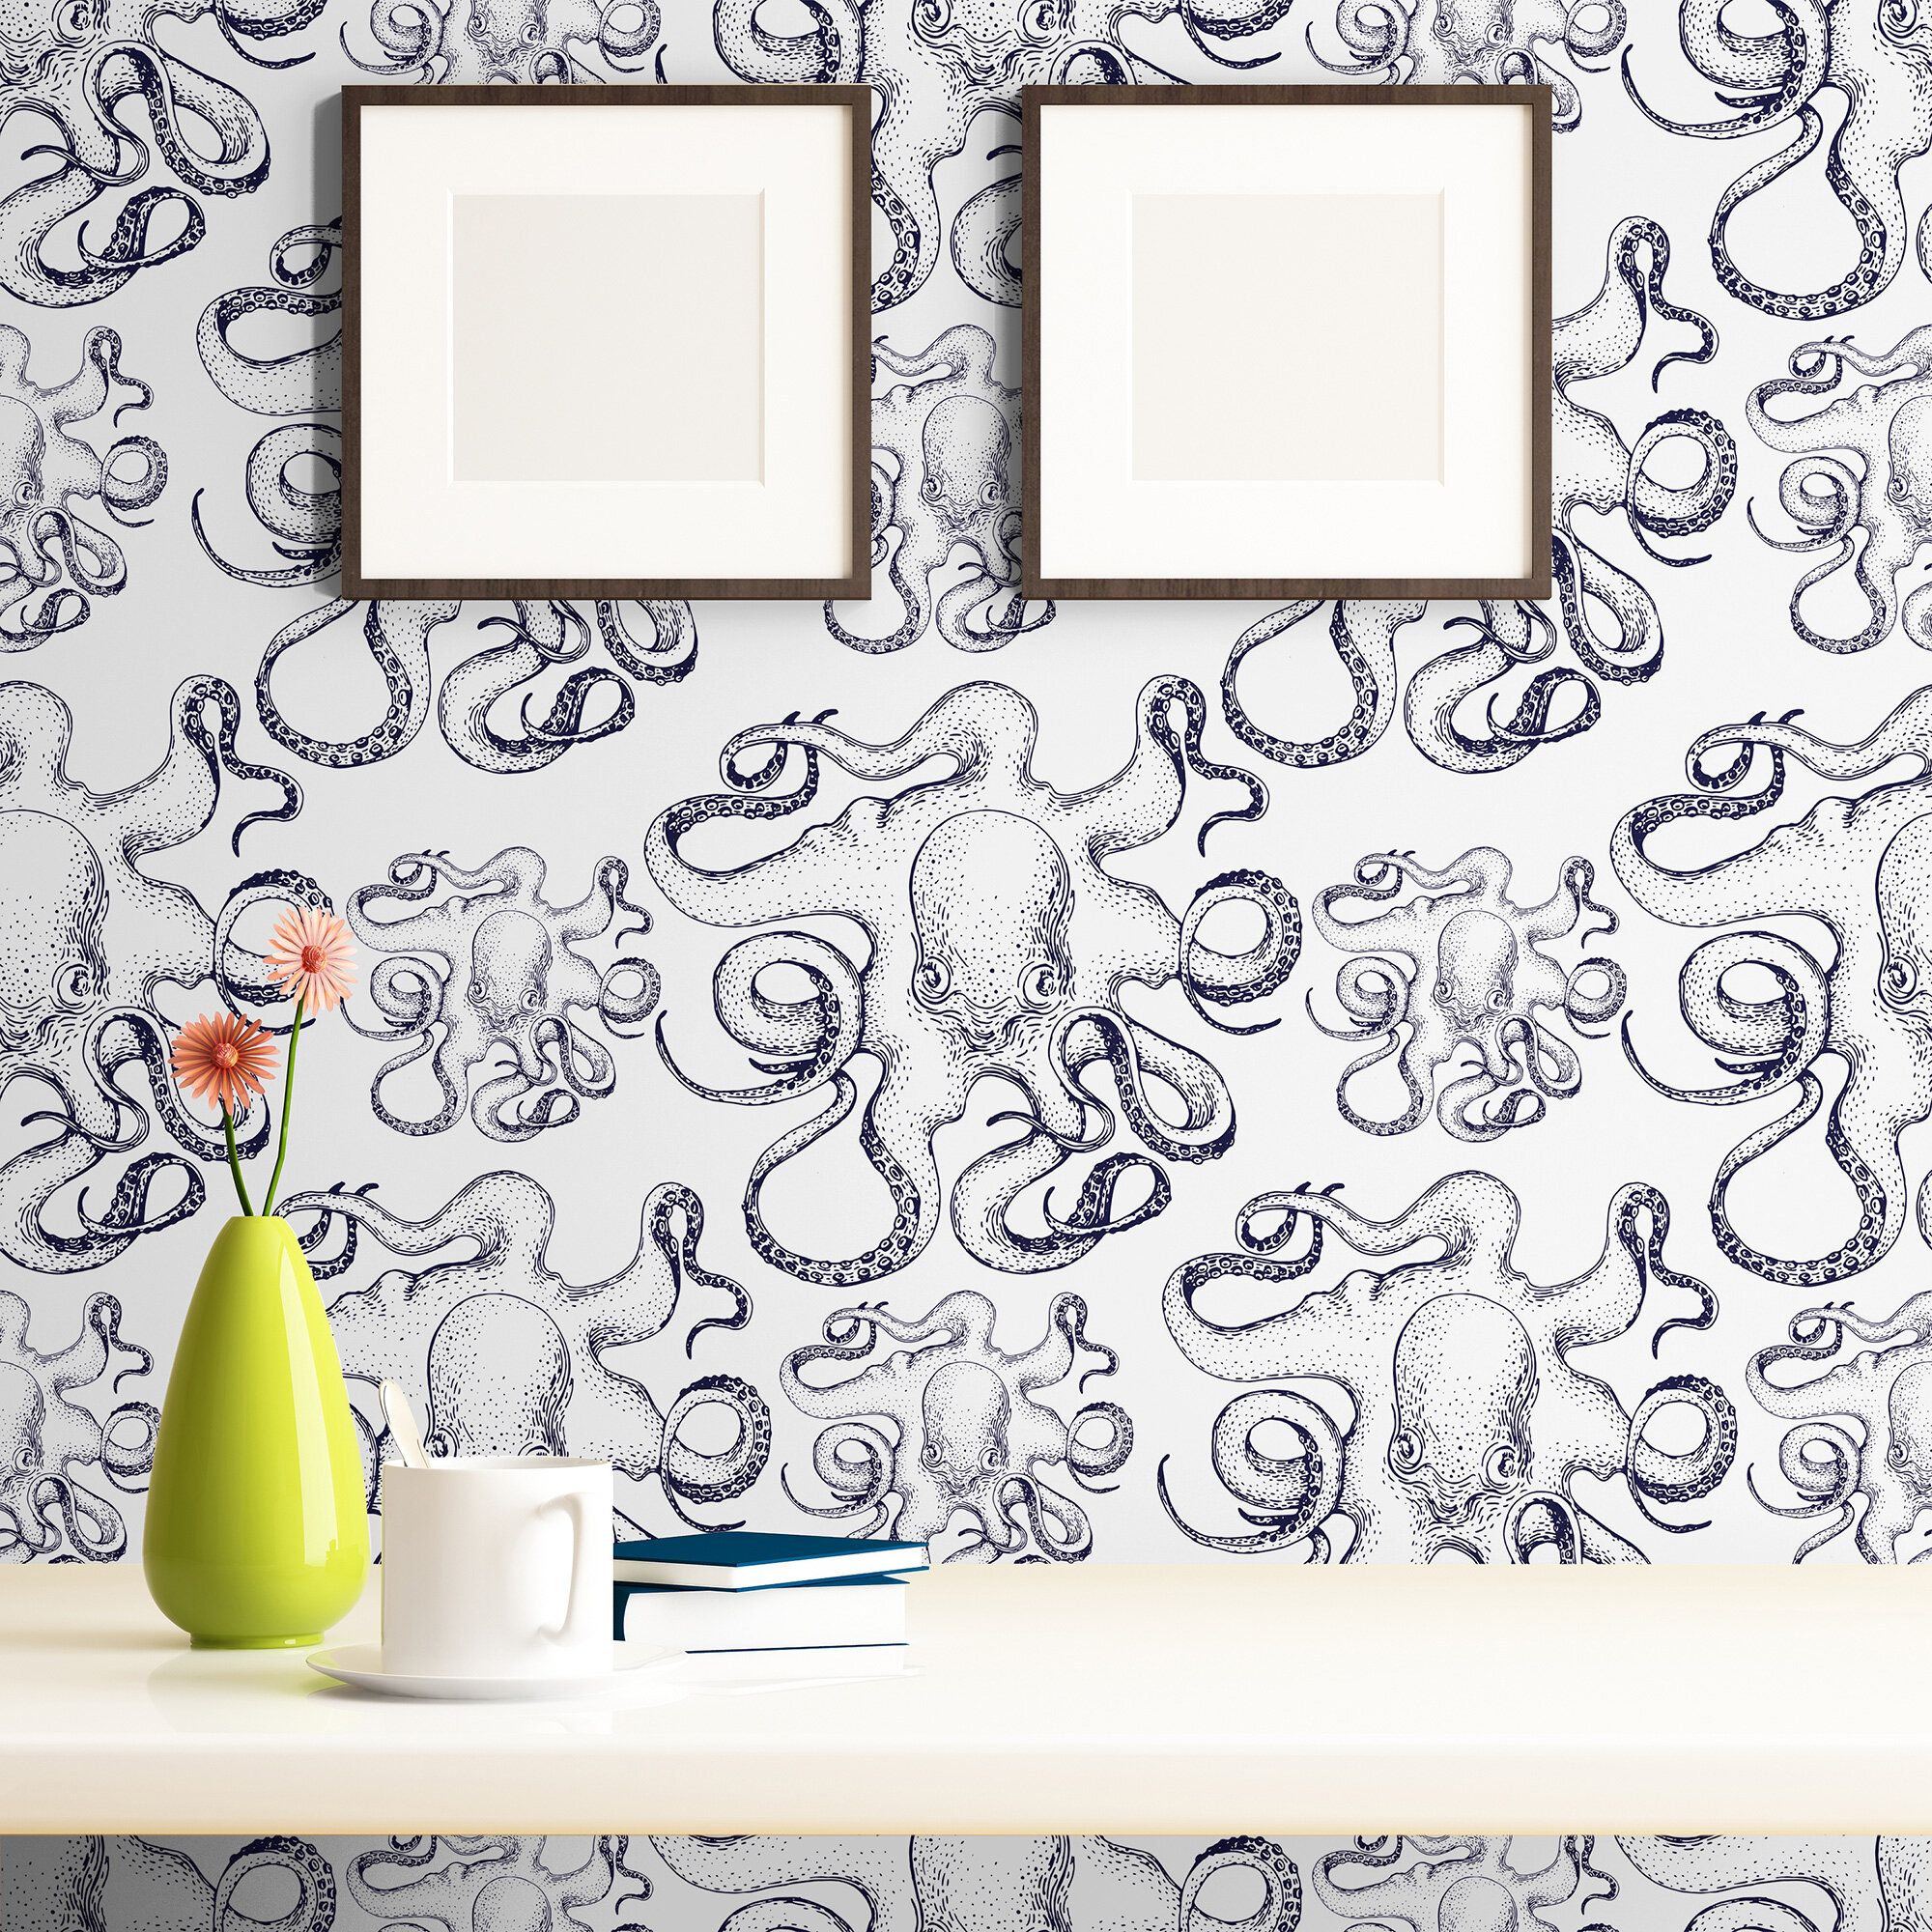 Blue Fish Removable Wallpaper Beach Wall Decor Cabin  Etsy  Blue and  white wallpaper Bathroom wallpaper fish Removable wallpaper